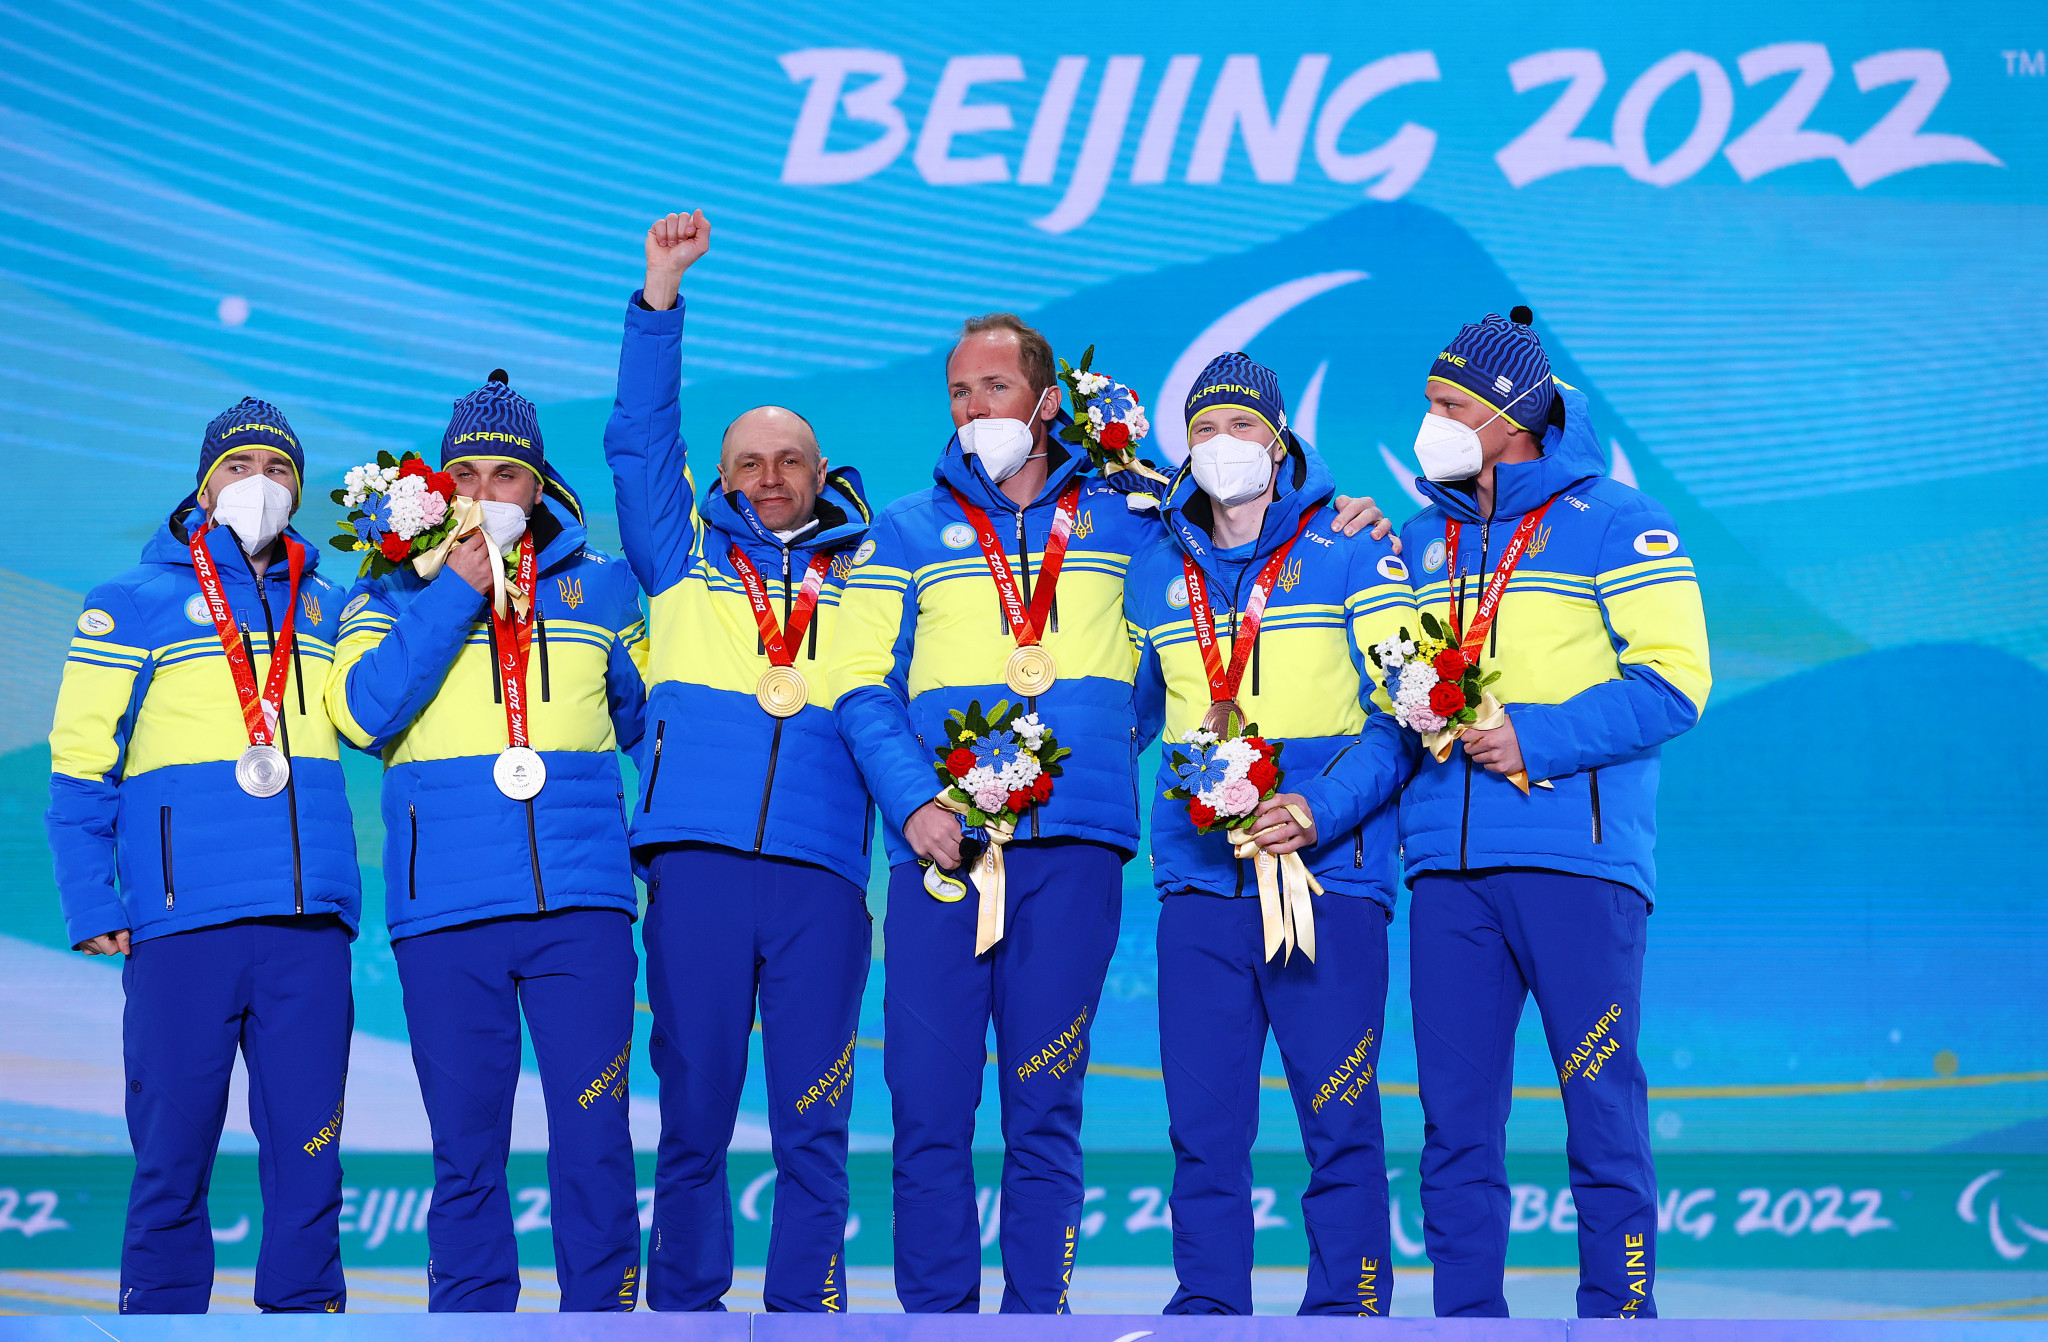 Ukraine swept the podium of the men's middle-distance vision impaired ©Getty Images